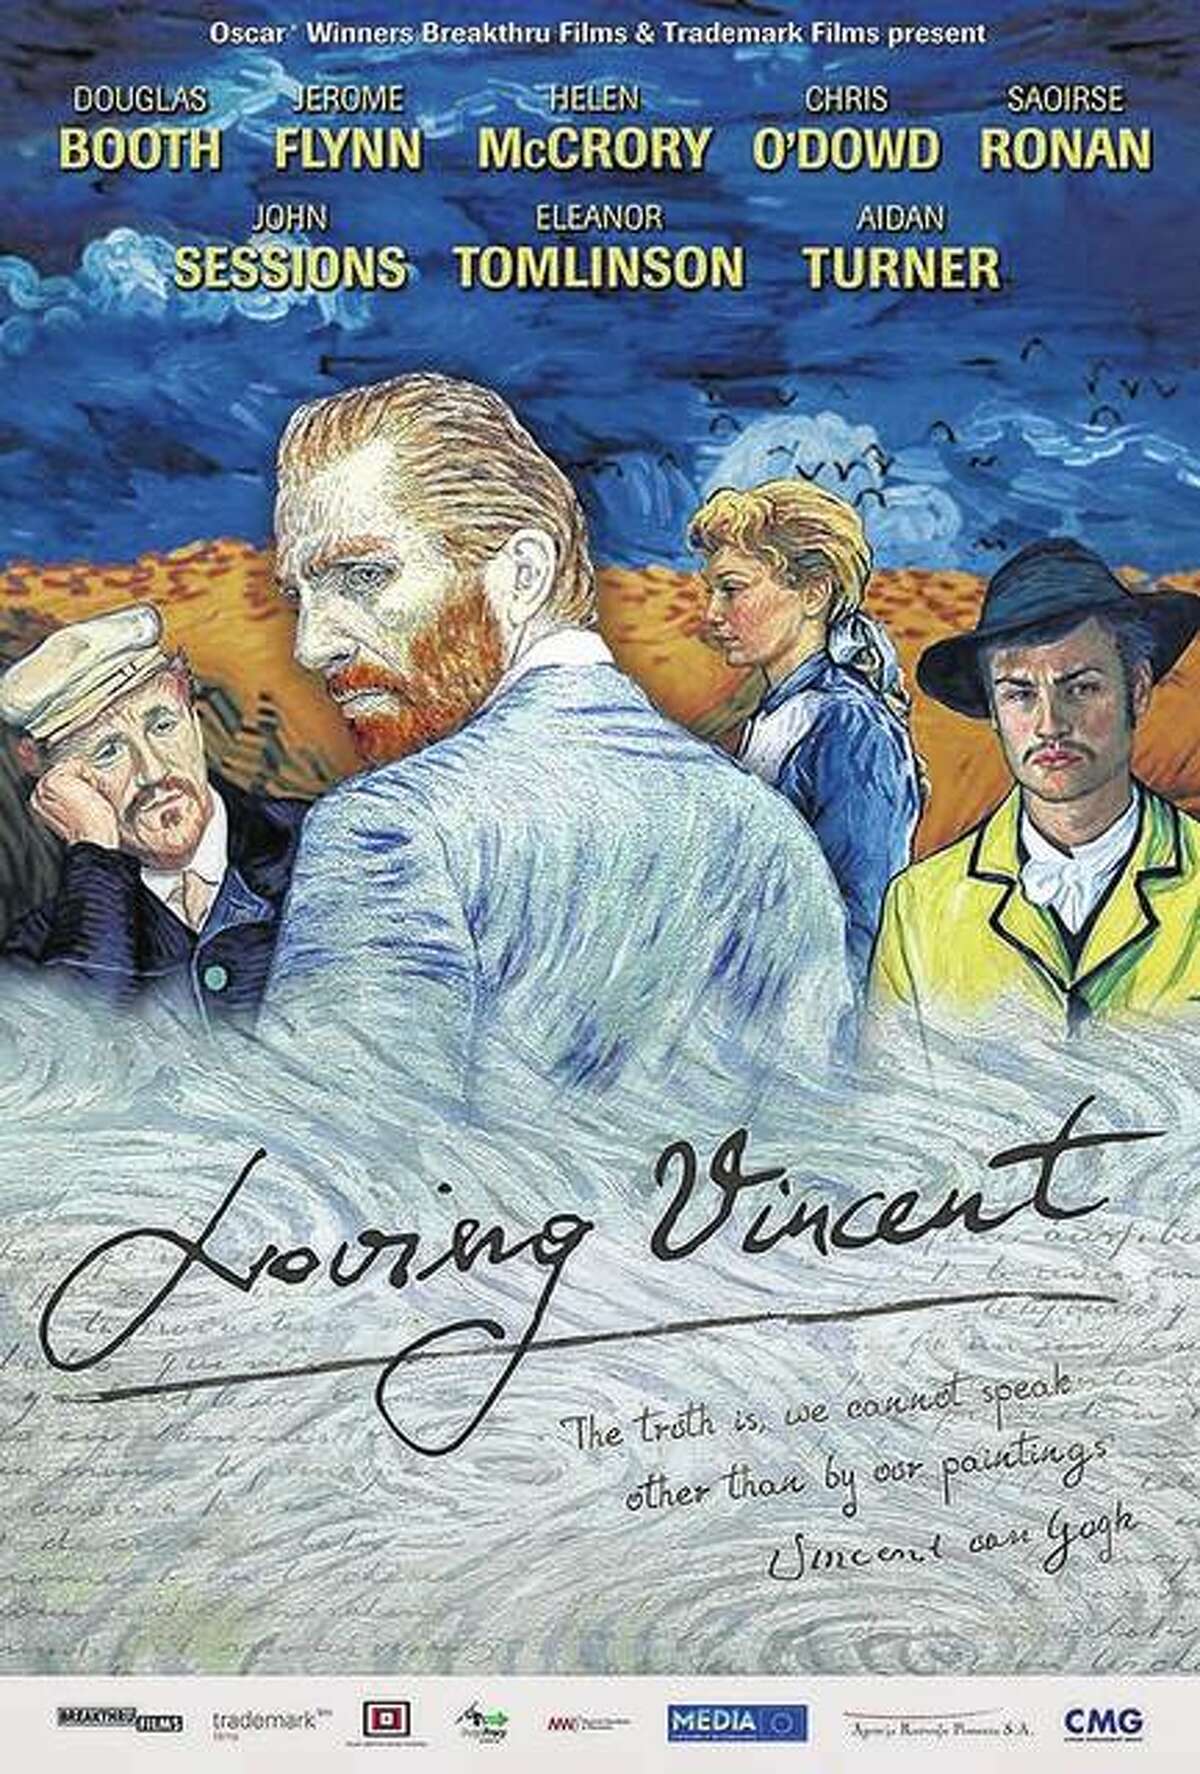 “Loving Vincent” uses tens of thousands of oil-painted animation screens to tell its story about Vincent van Gogh.